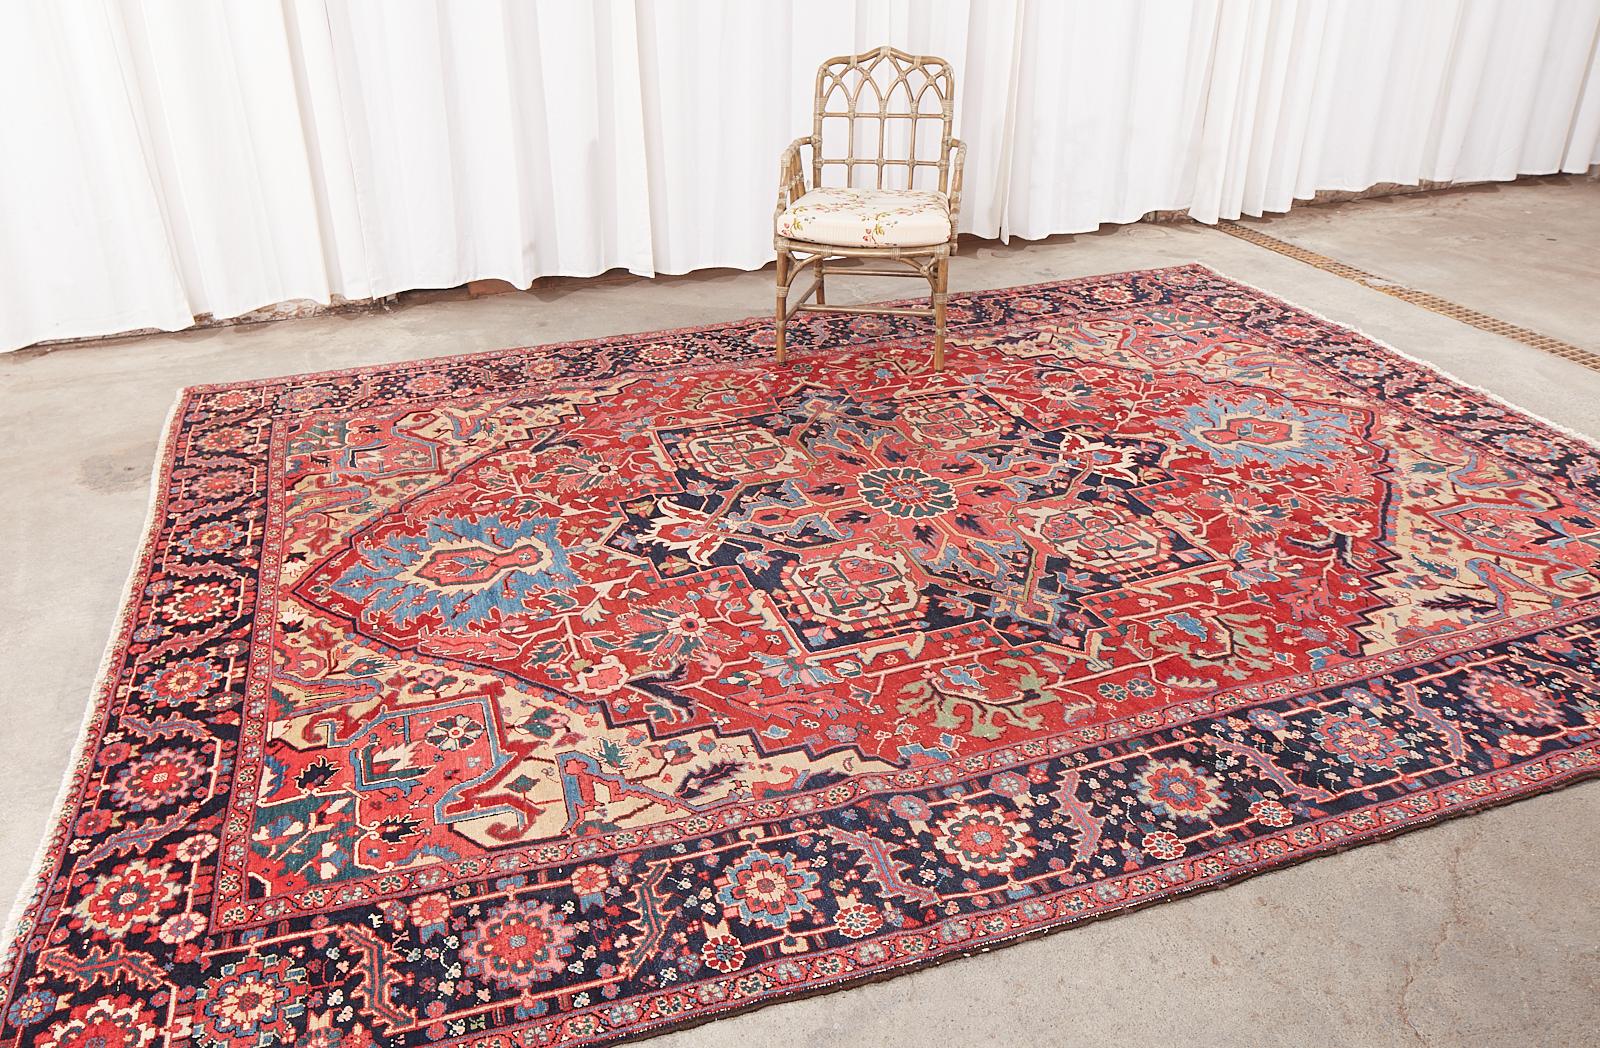 Traditionally styled semi-antique 20th century Persian Heriz rug crafted from hand-knotted wool with a cotton warp. The rug features a large multi-faceted star medallion in a red field with fascinating electric blue palmette designs. The field has